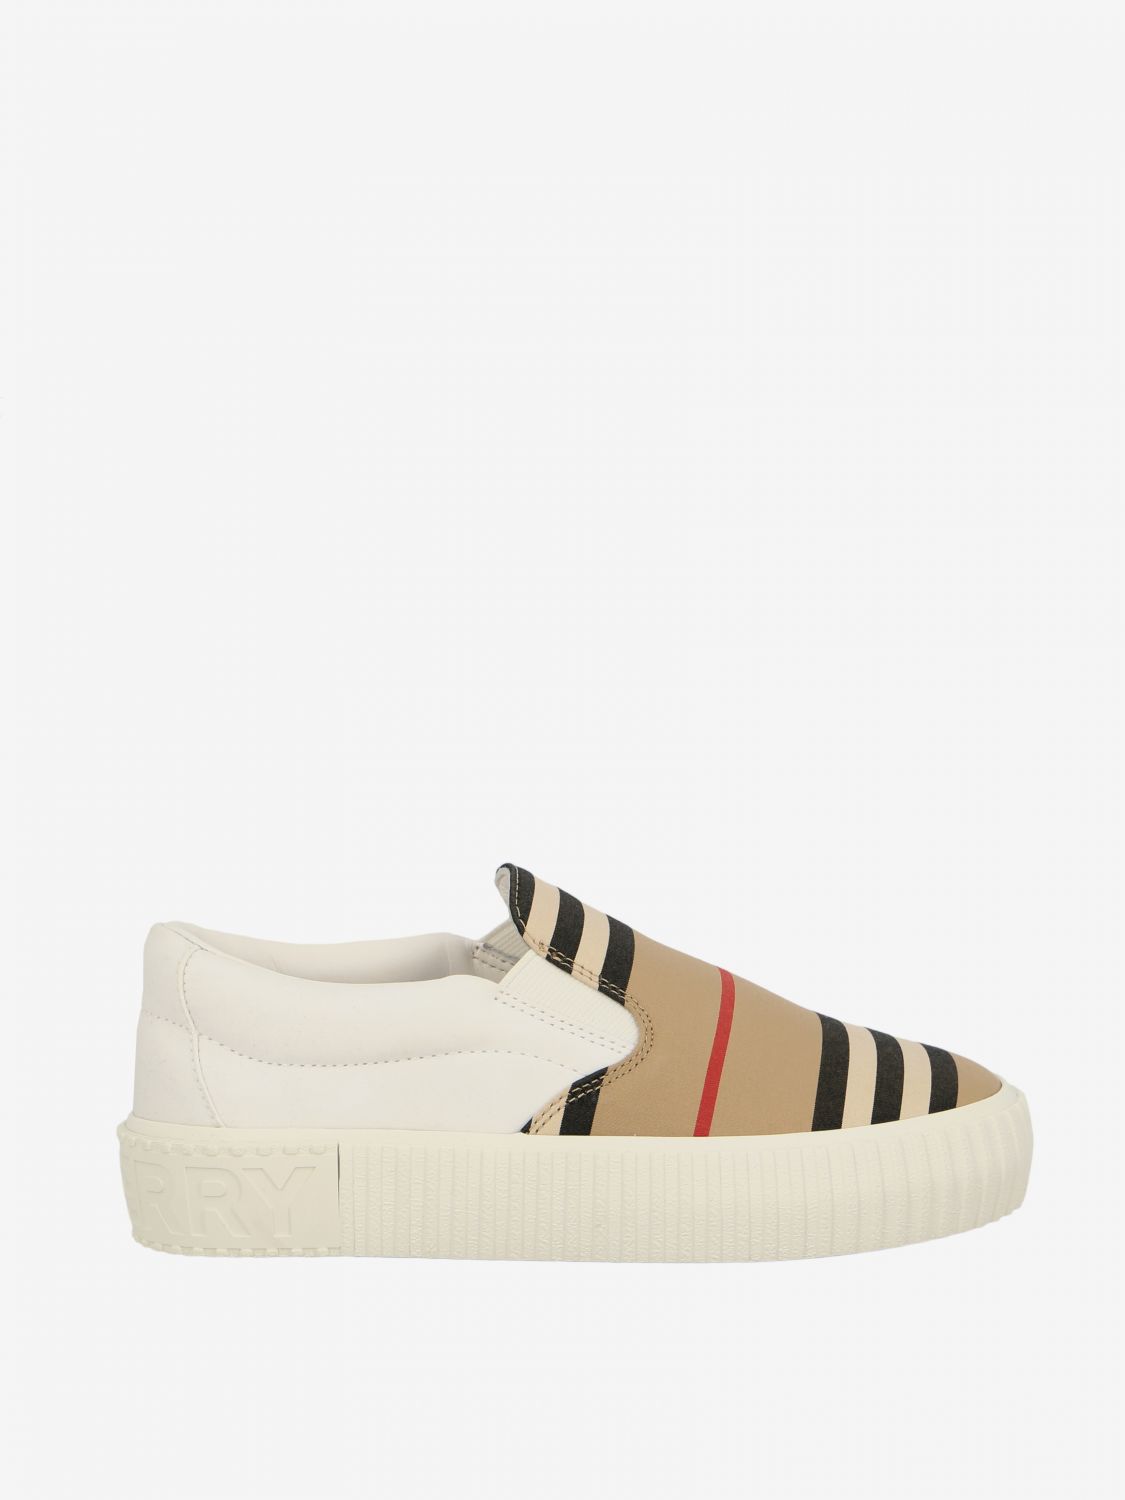 Gods controller effektivt Burberry Outlet: vintage striped slip-on sneakers | Shoes Burberry Kids  Beige | Shoes Burberry 8023753 GIGLIO.COM